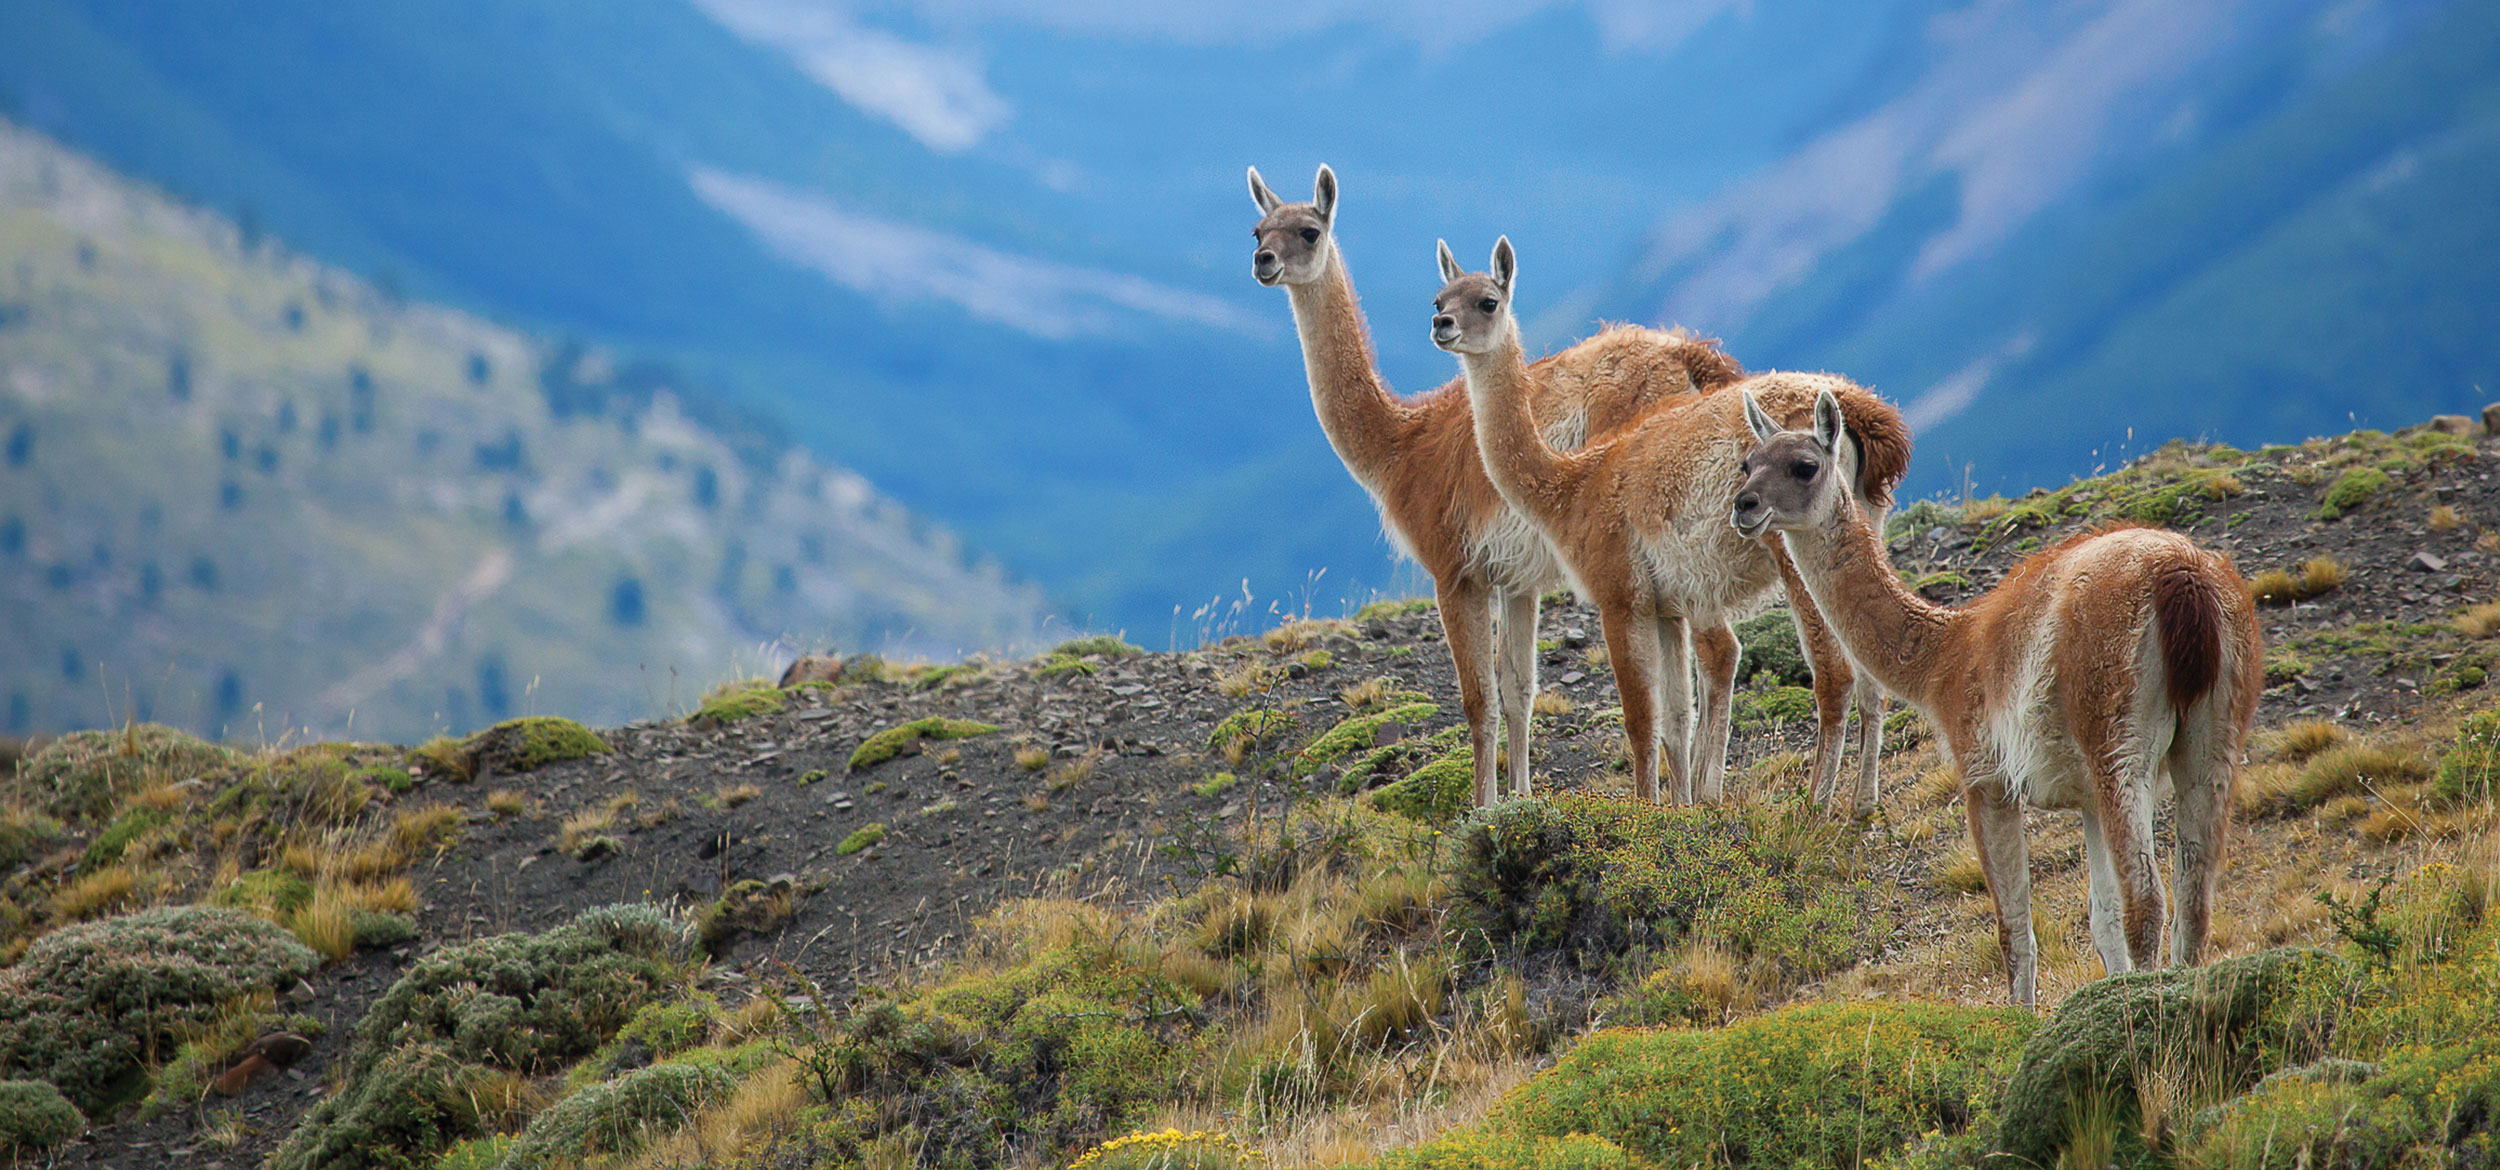 Three guanacos in Torres del Paine National Park in Chile